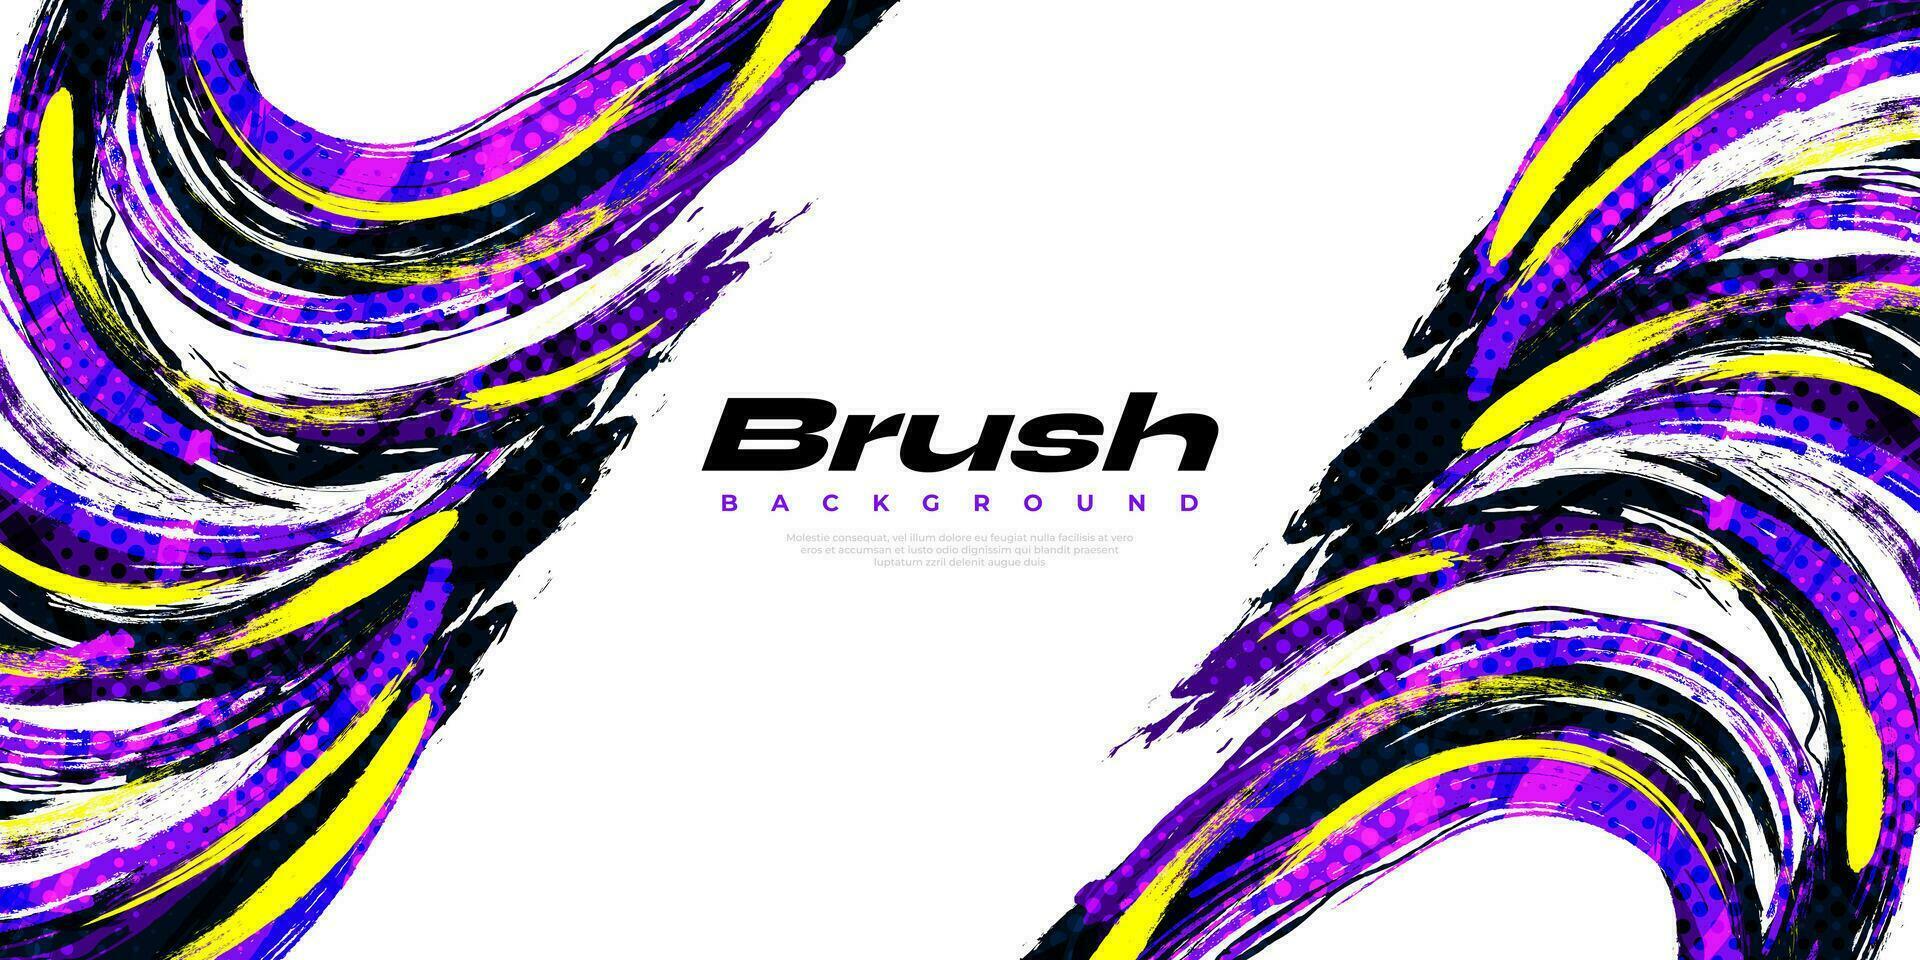 Abstract and Colorful Brush Background with Halftone Effect. Brush Stroke Illustration for Banner, Poster, or Sports Background. Scratch and Texture Elements For Design vector